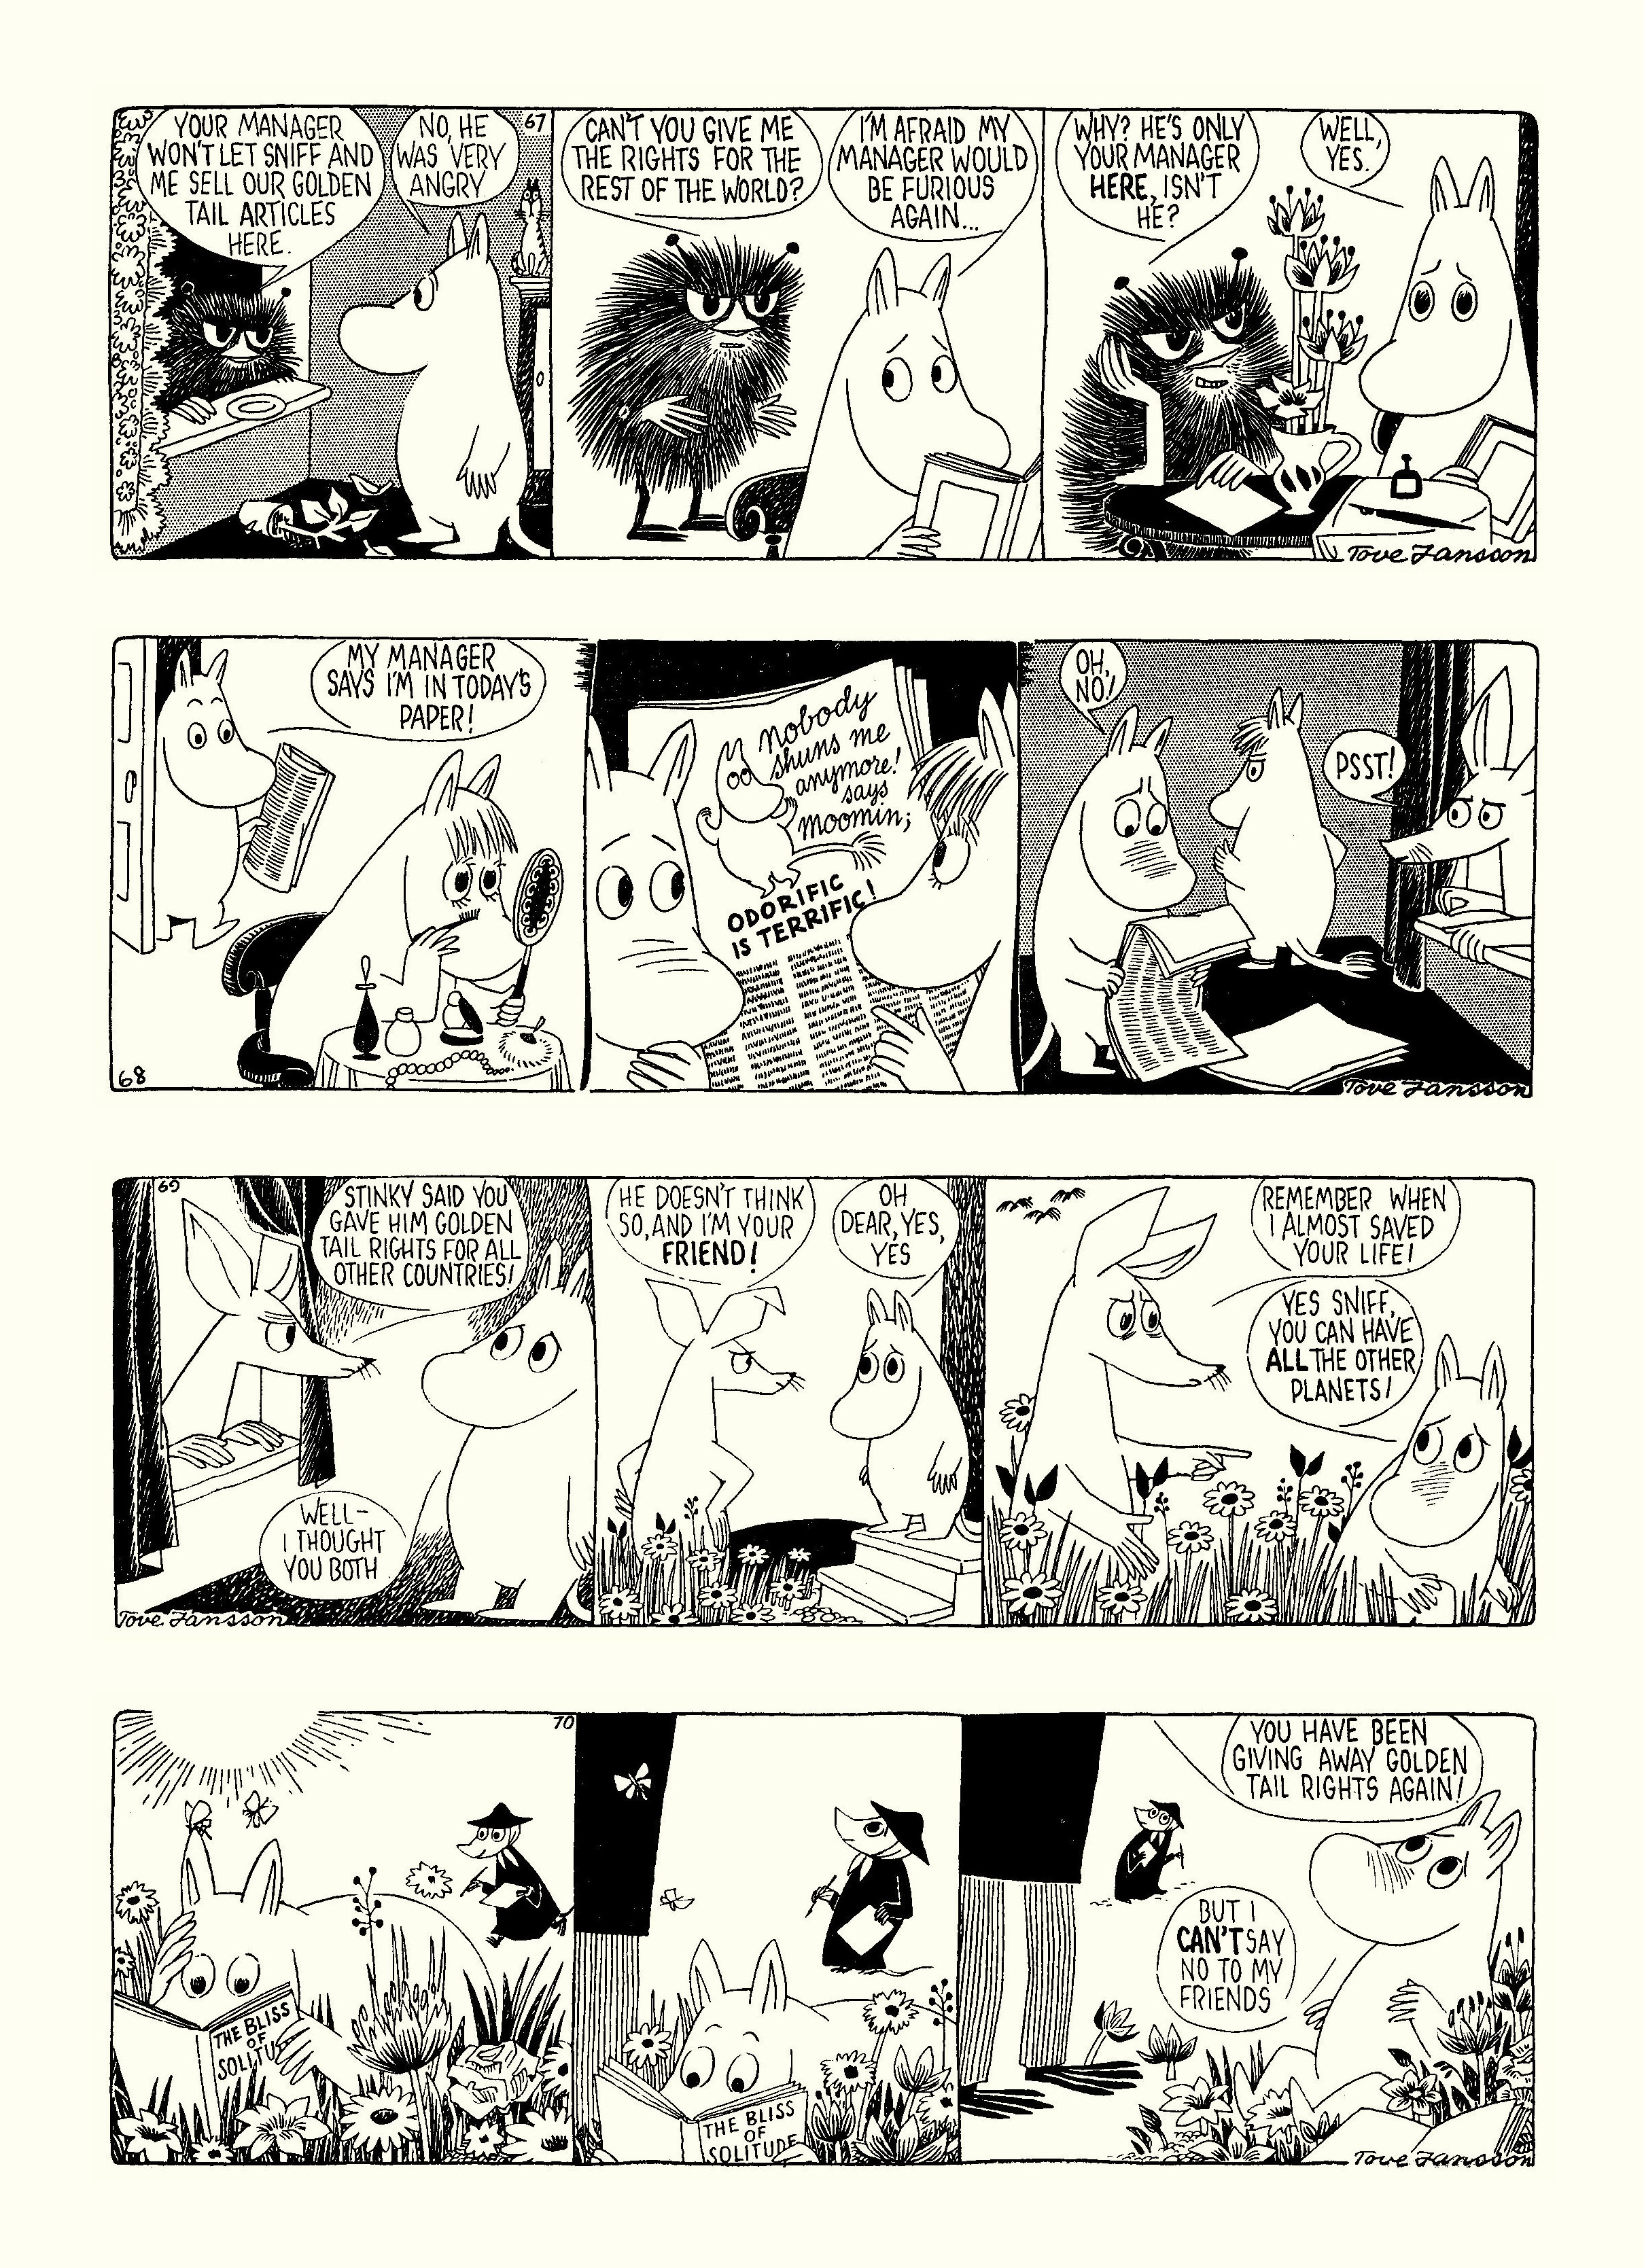 Read online Moomin: The Complete Tove Jansson Comic Strip comic -  Issue # TPB 4 - 96